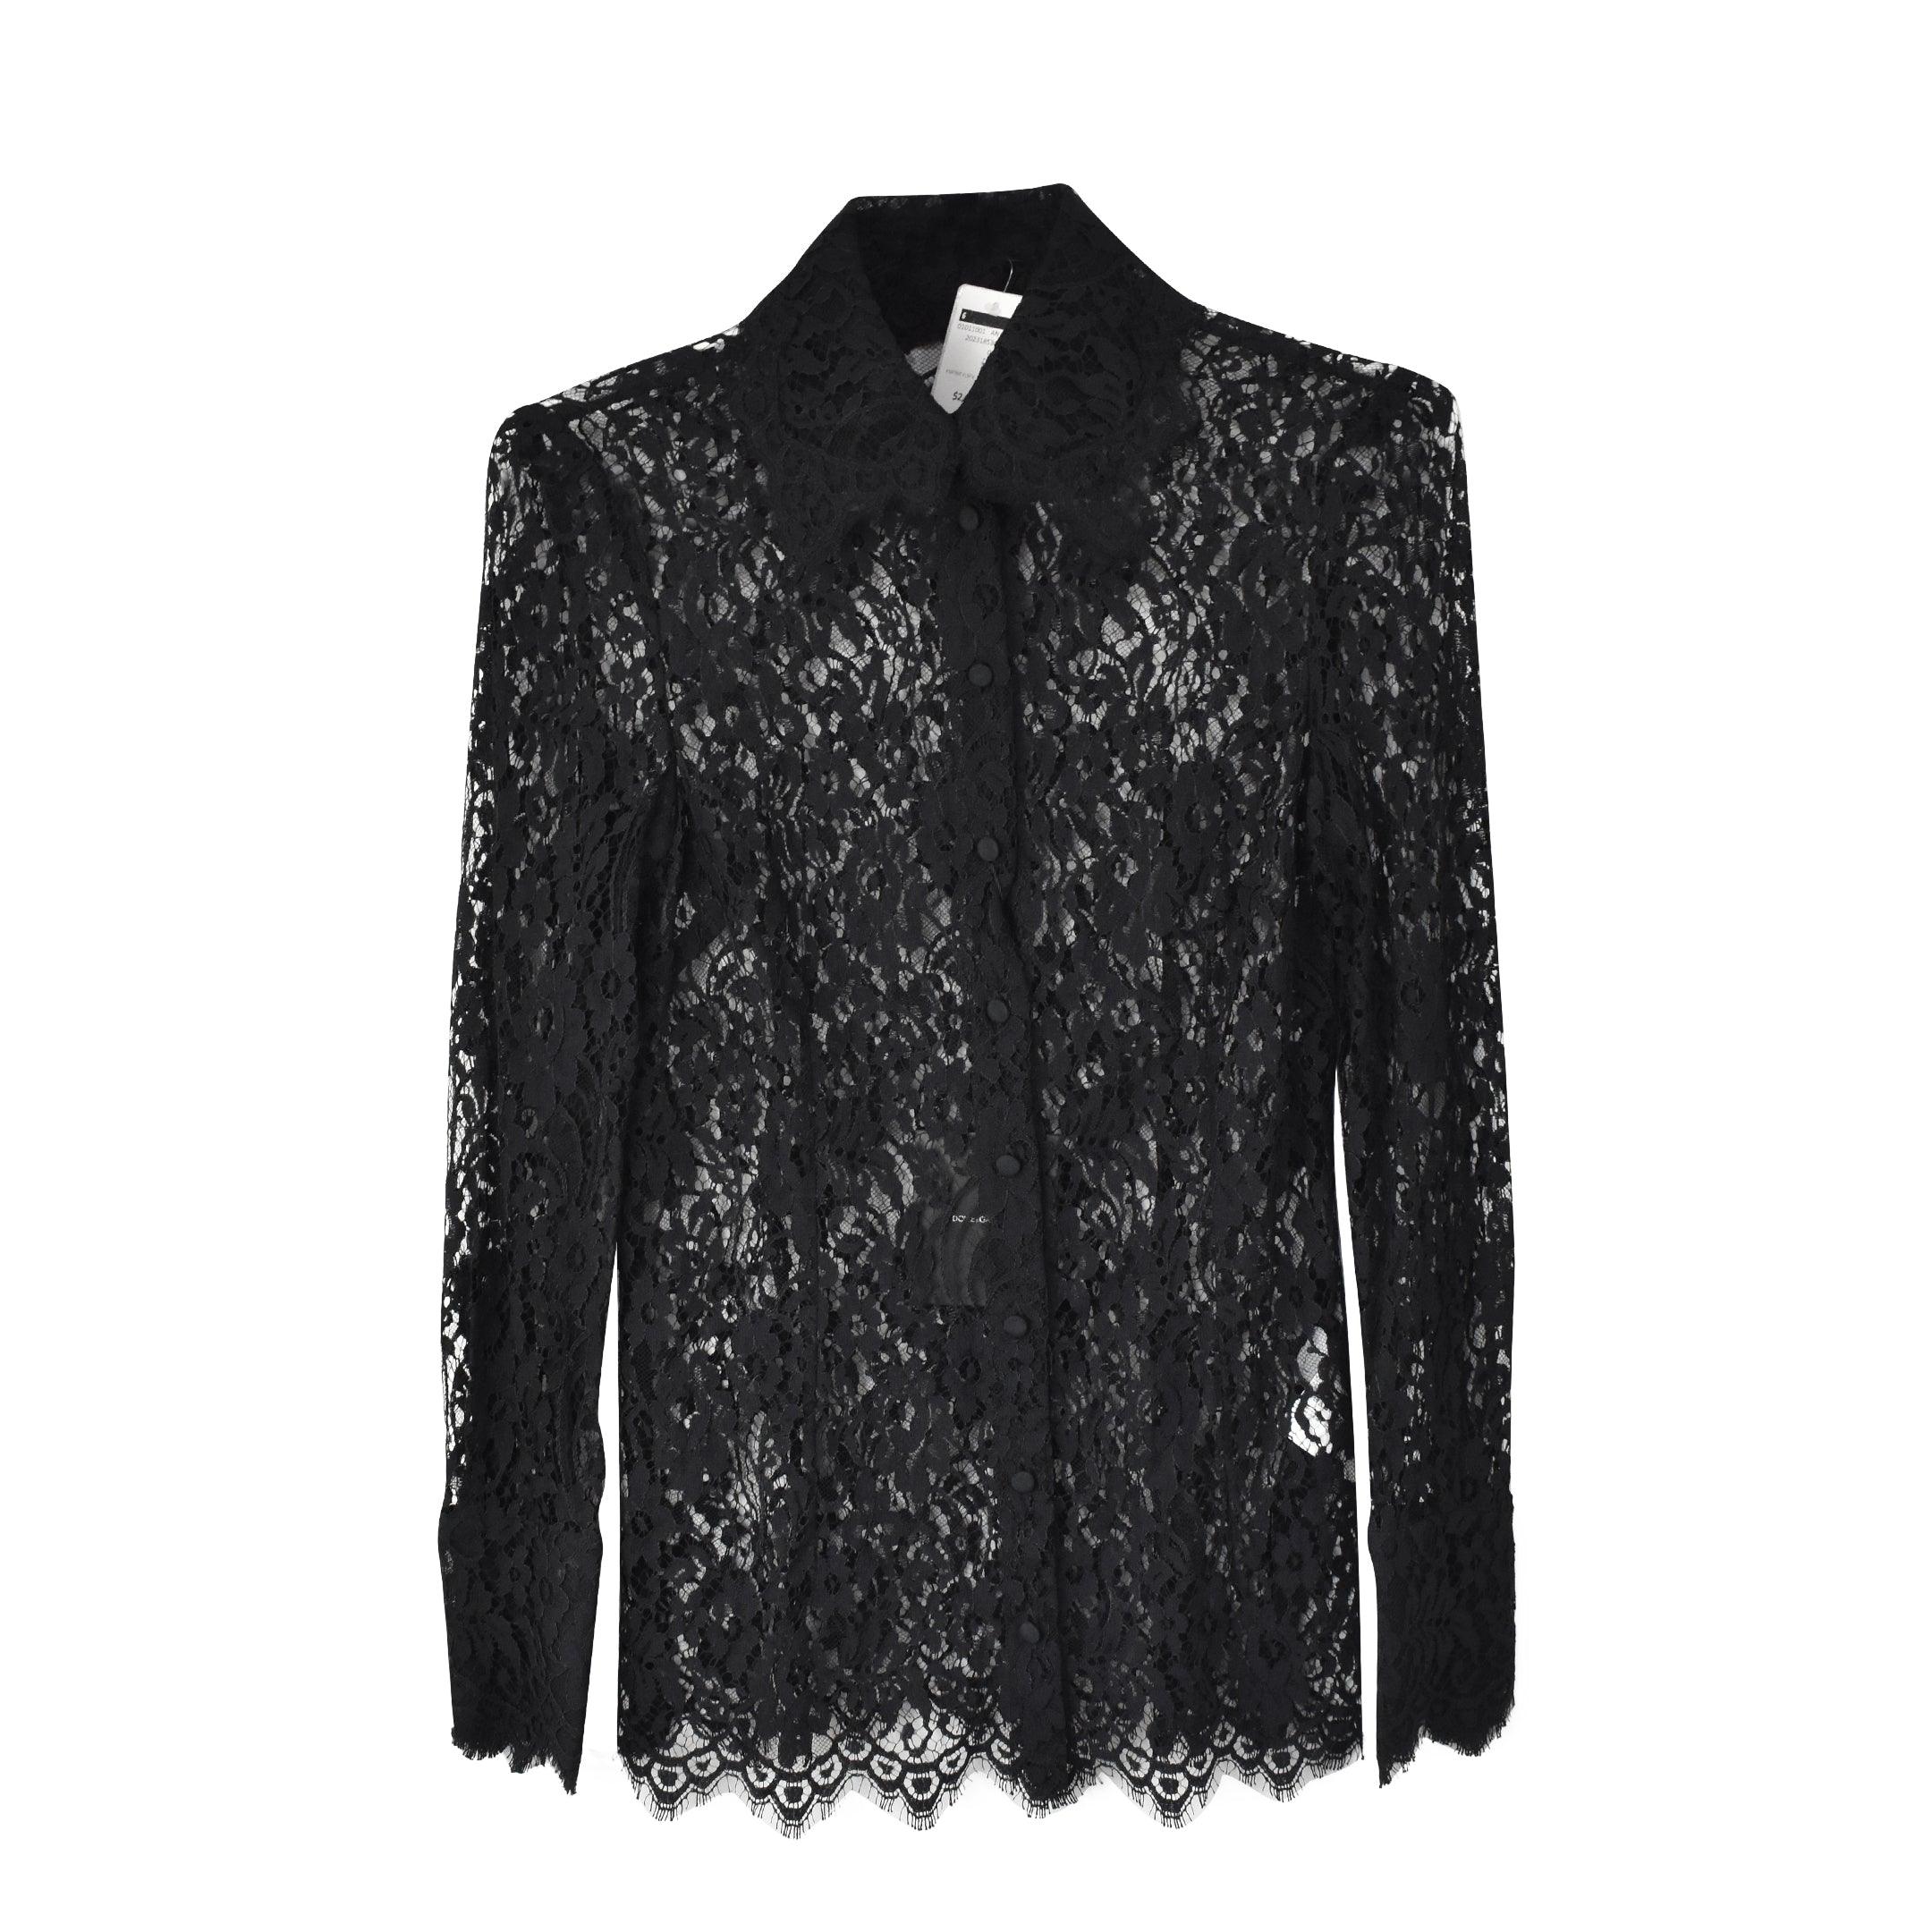 Dolce & Gabbana Lace Blouse - Women's 40 - Fashionably Yours